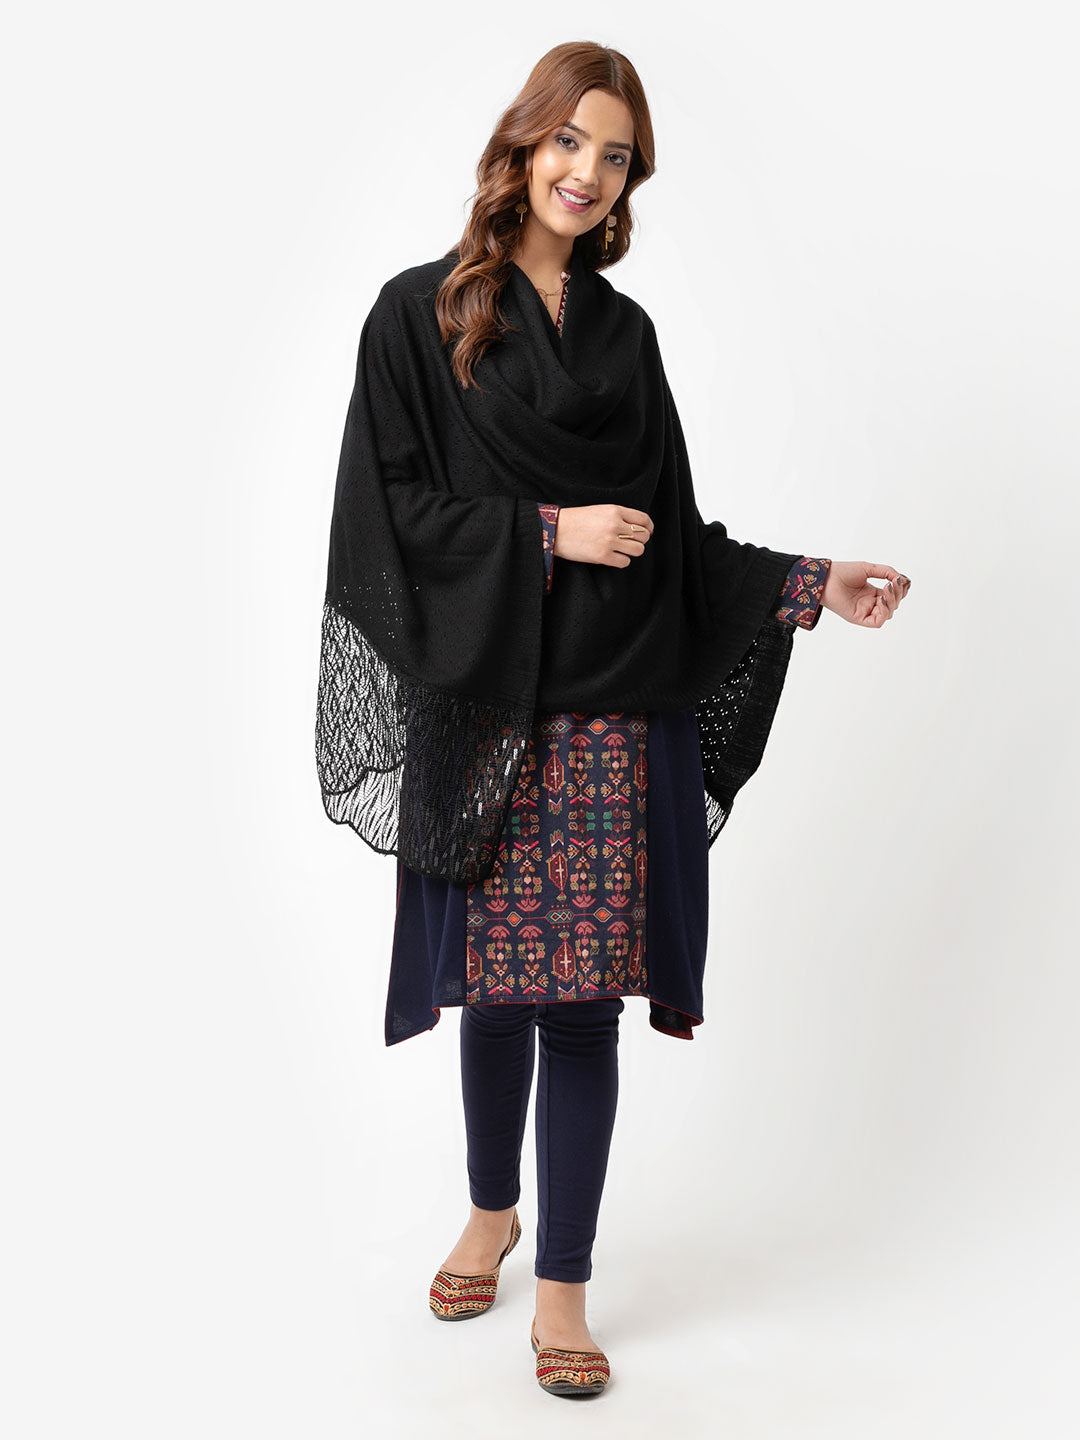 Black Solid Knitted Shawl